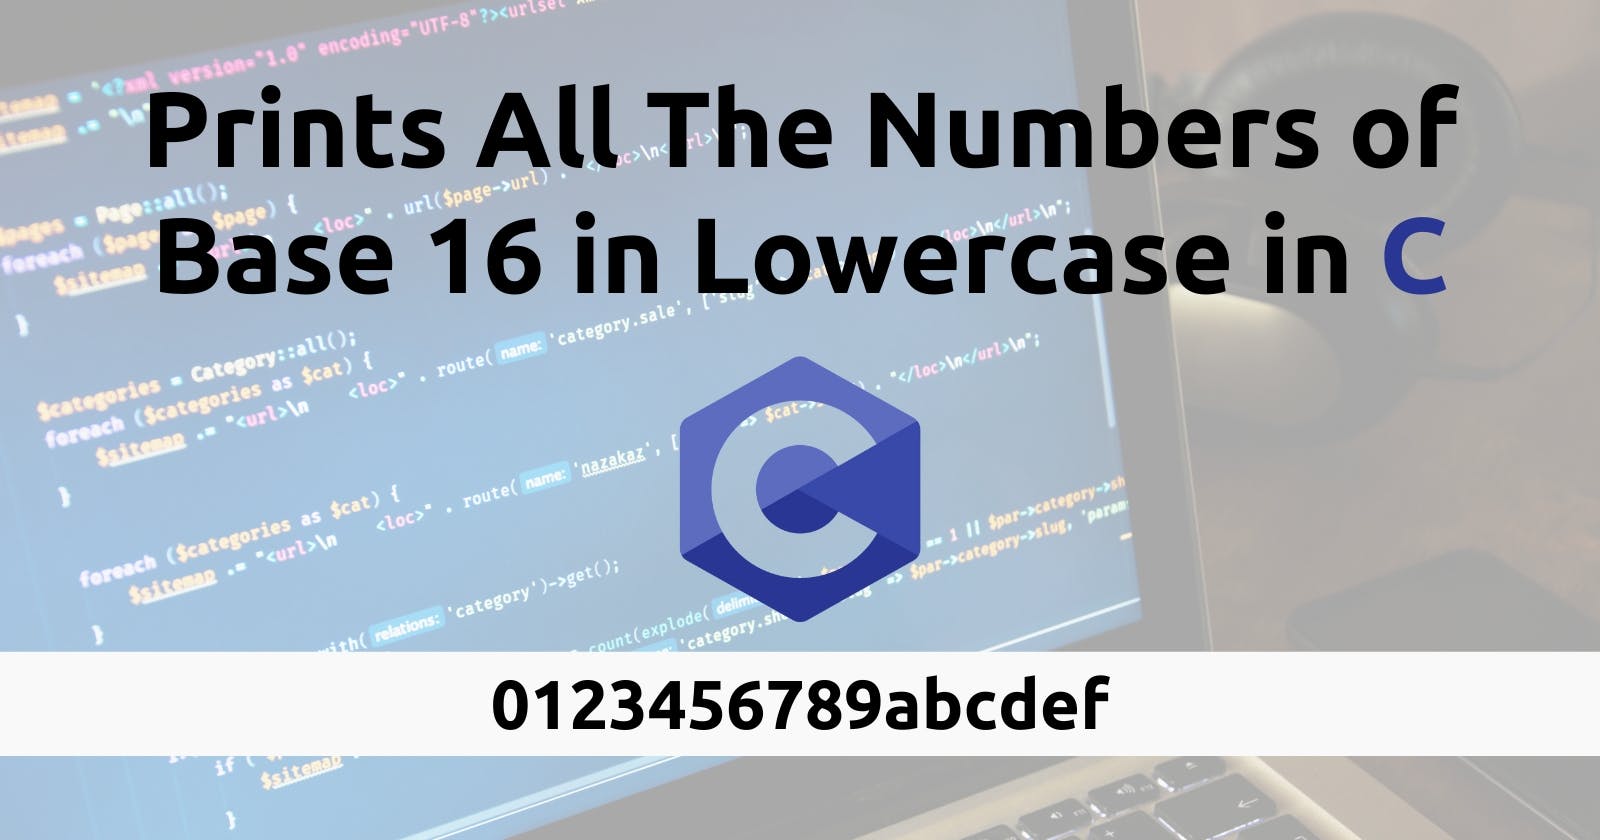 How to Write a Program That Prints All the Numbers of Base 16 in Lowercase in C